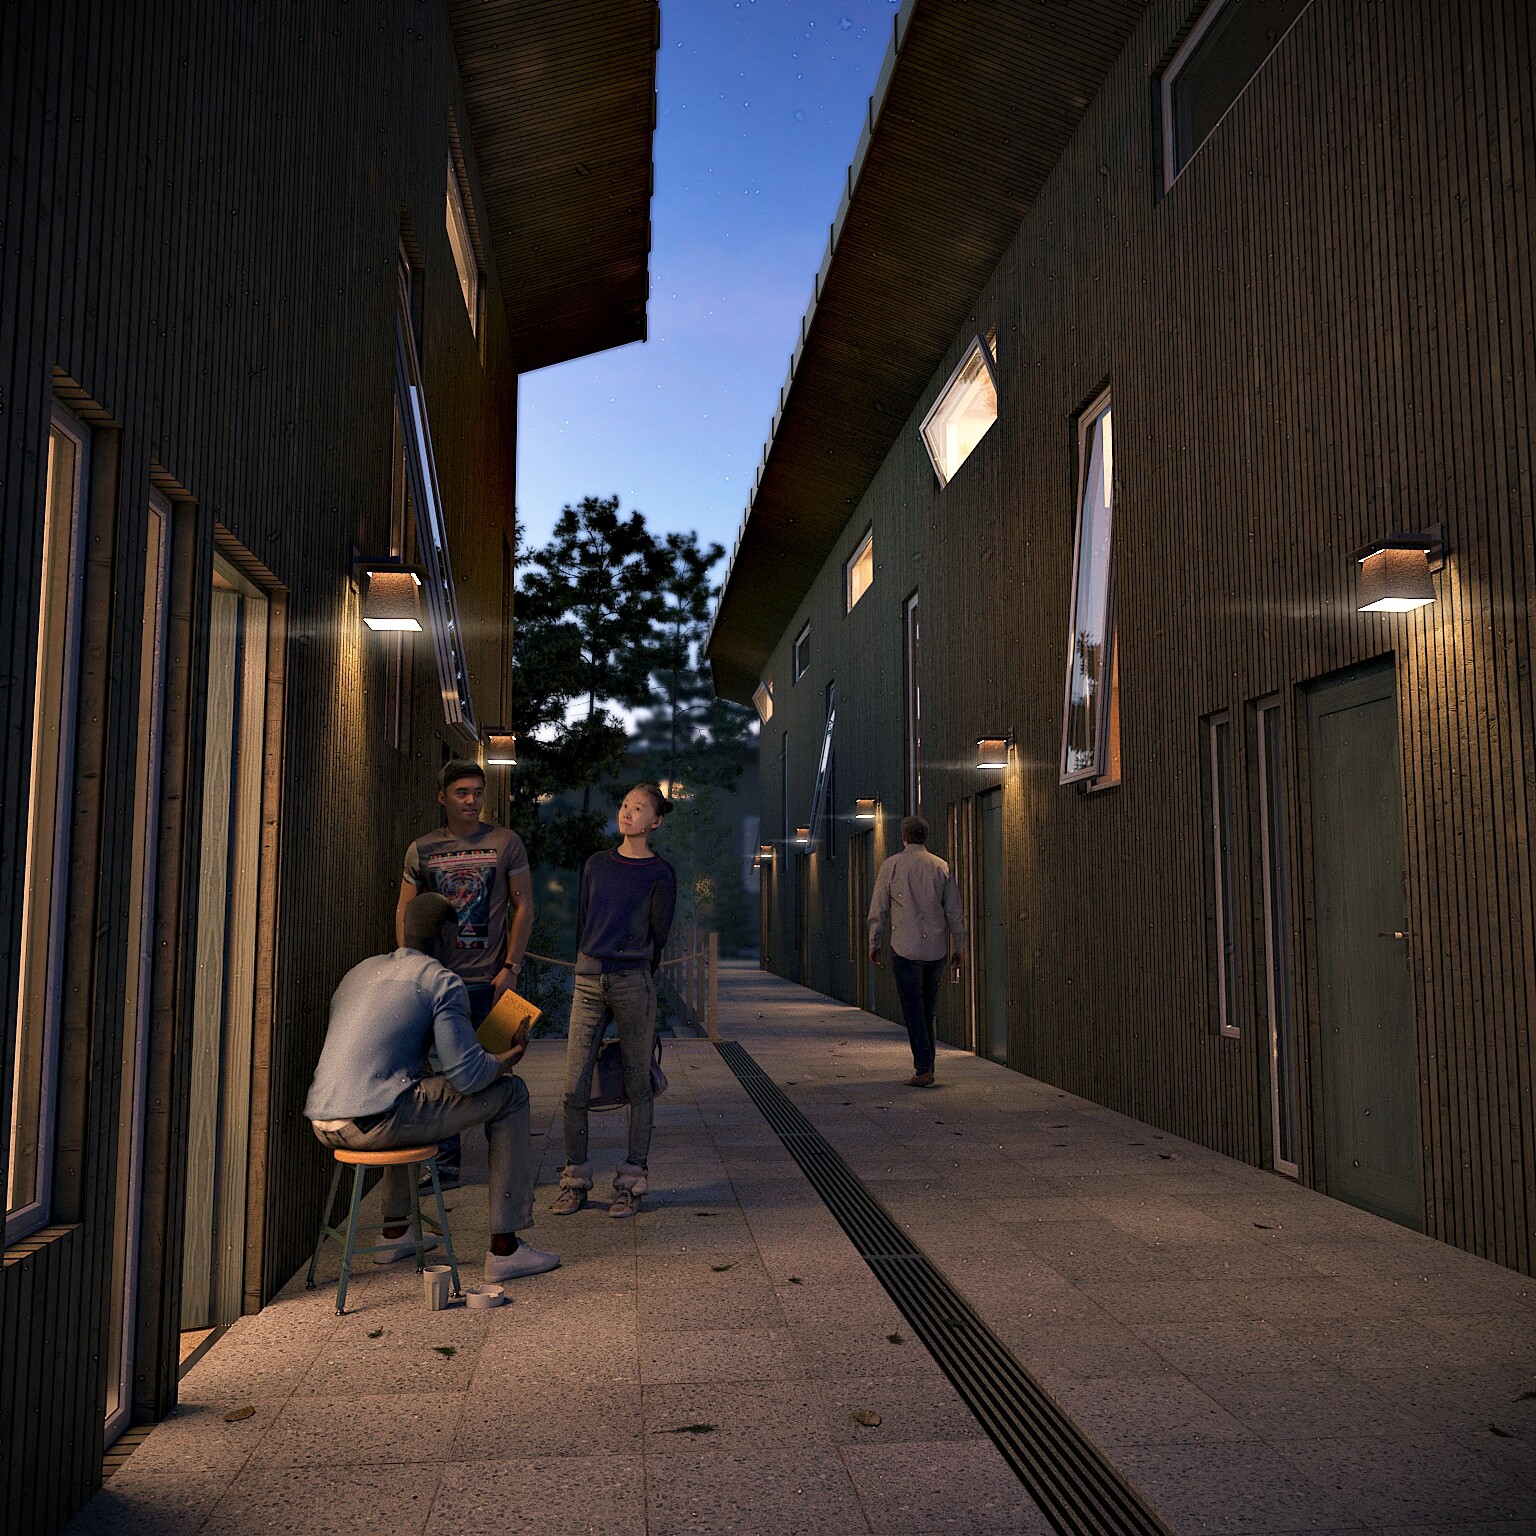 Exterior view of the raised 'streets' formed by my proposal. Summer time.